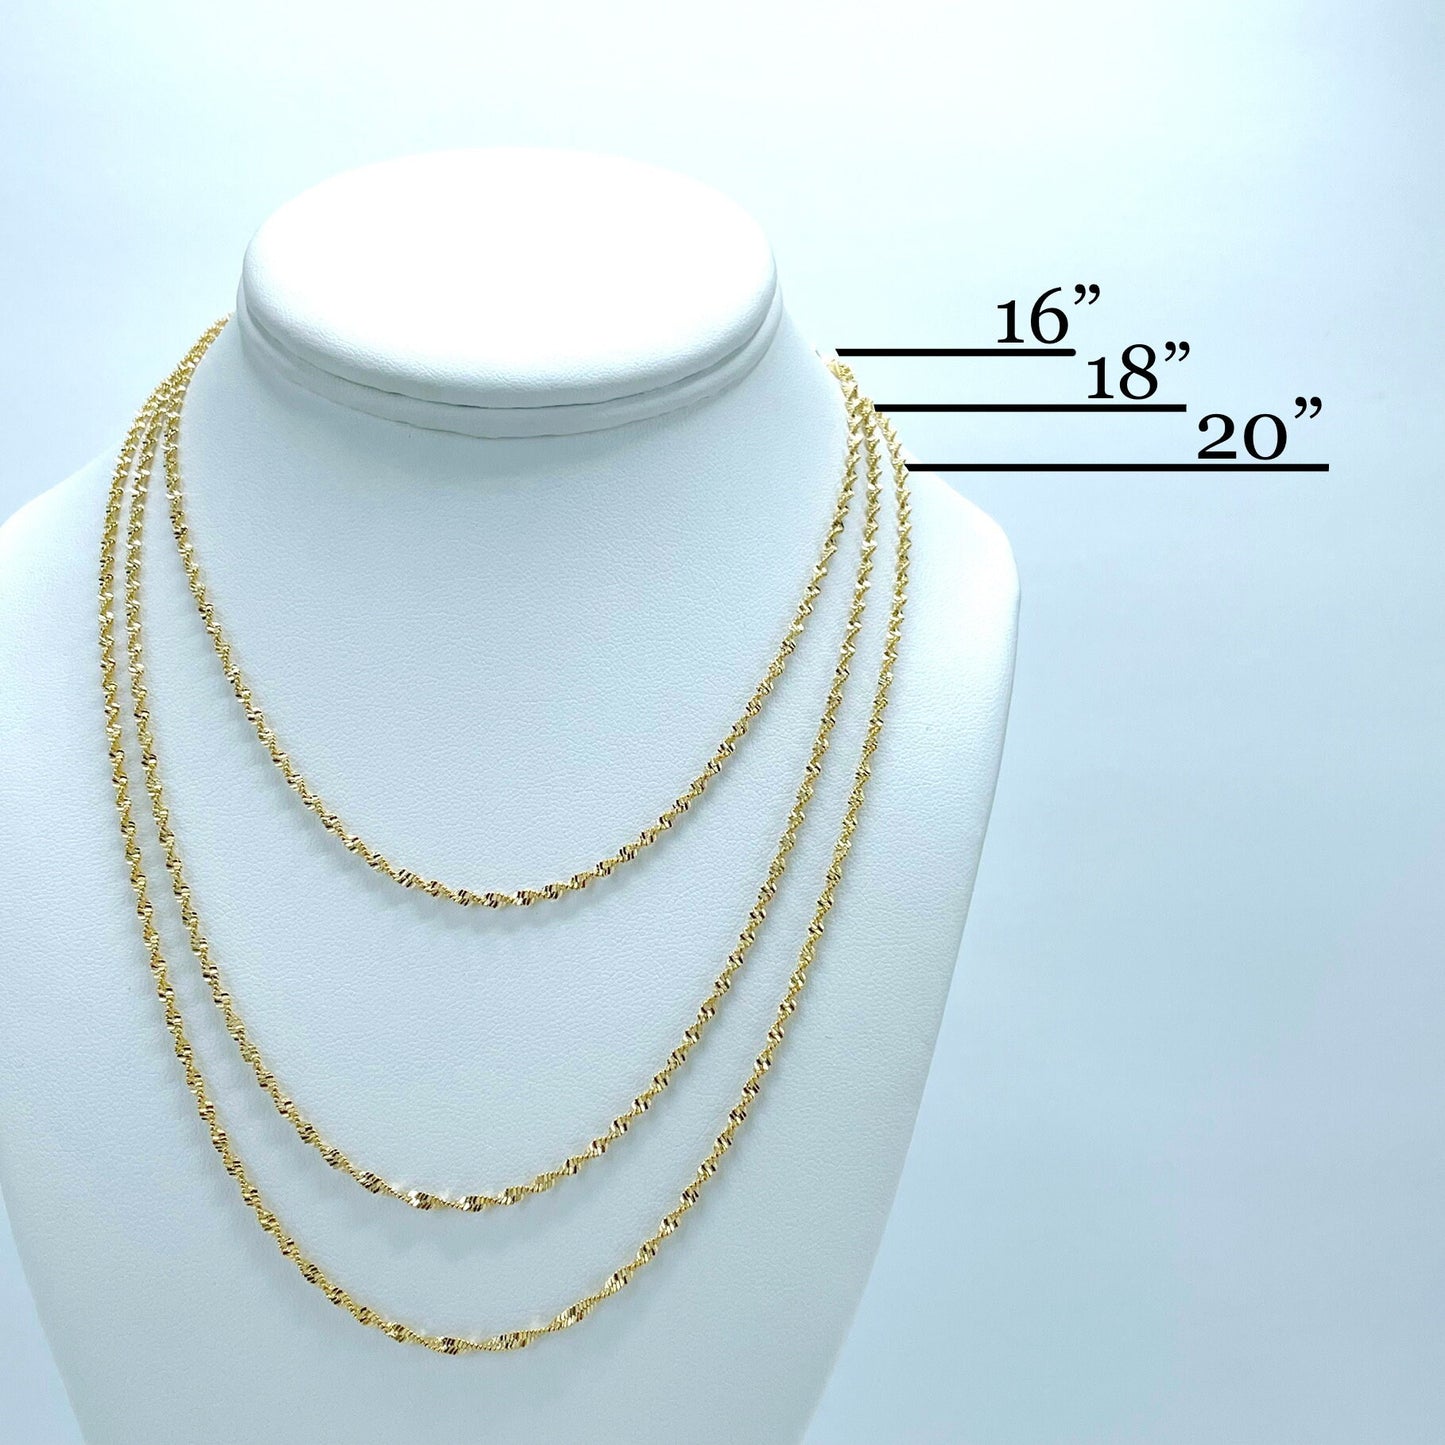 18k Gold Filled Singapore Link Chain 2mm, length 16 inches or 18 inches, 18 inches, 20 inches Chain Wholesale Jewelry Making Supplies